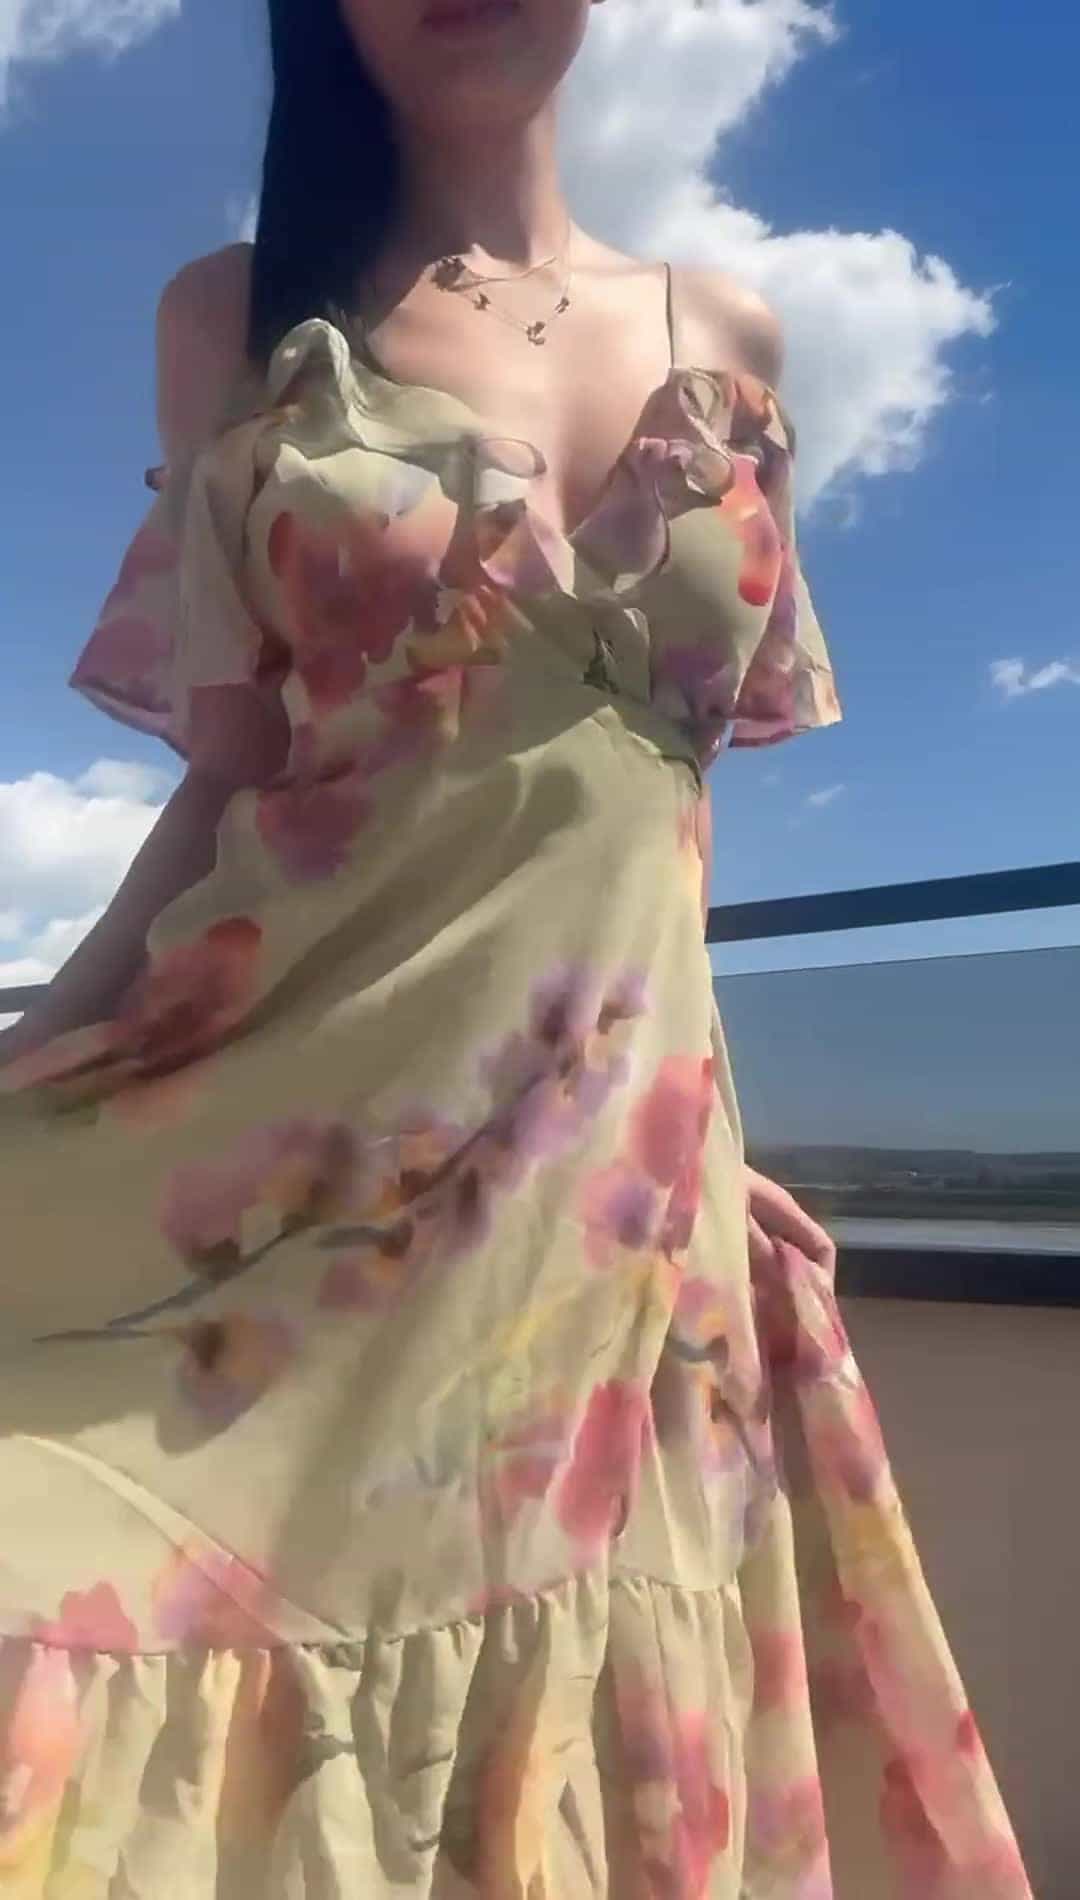 Adorable sundress with a sexy body underneath